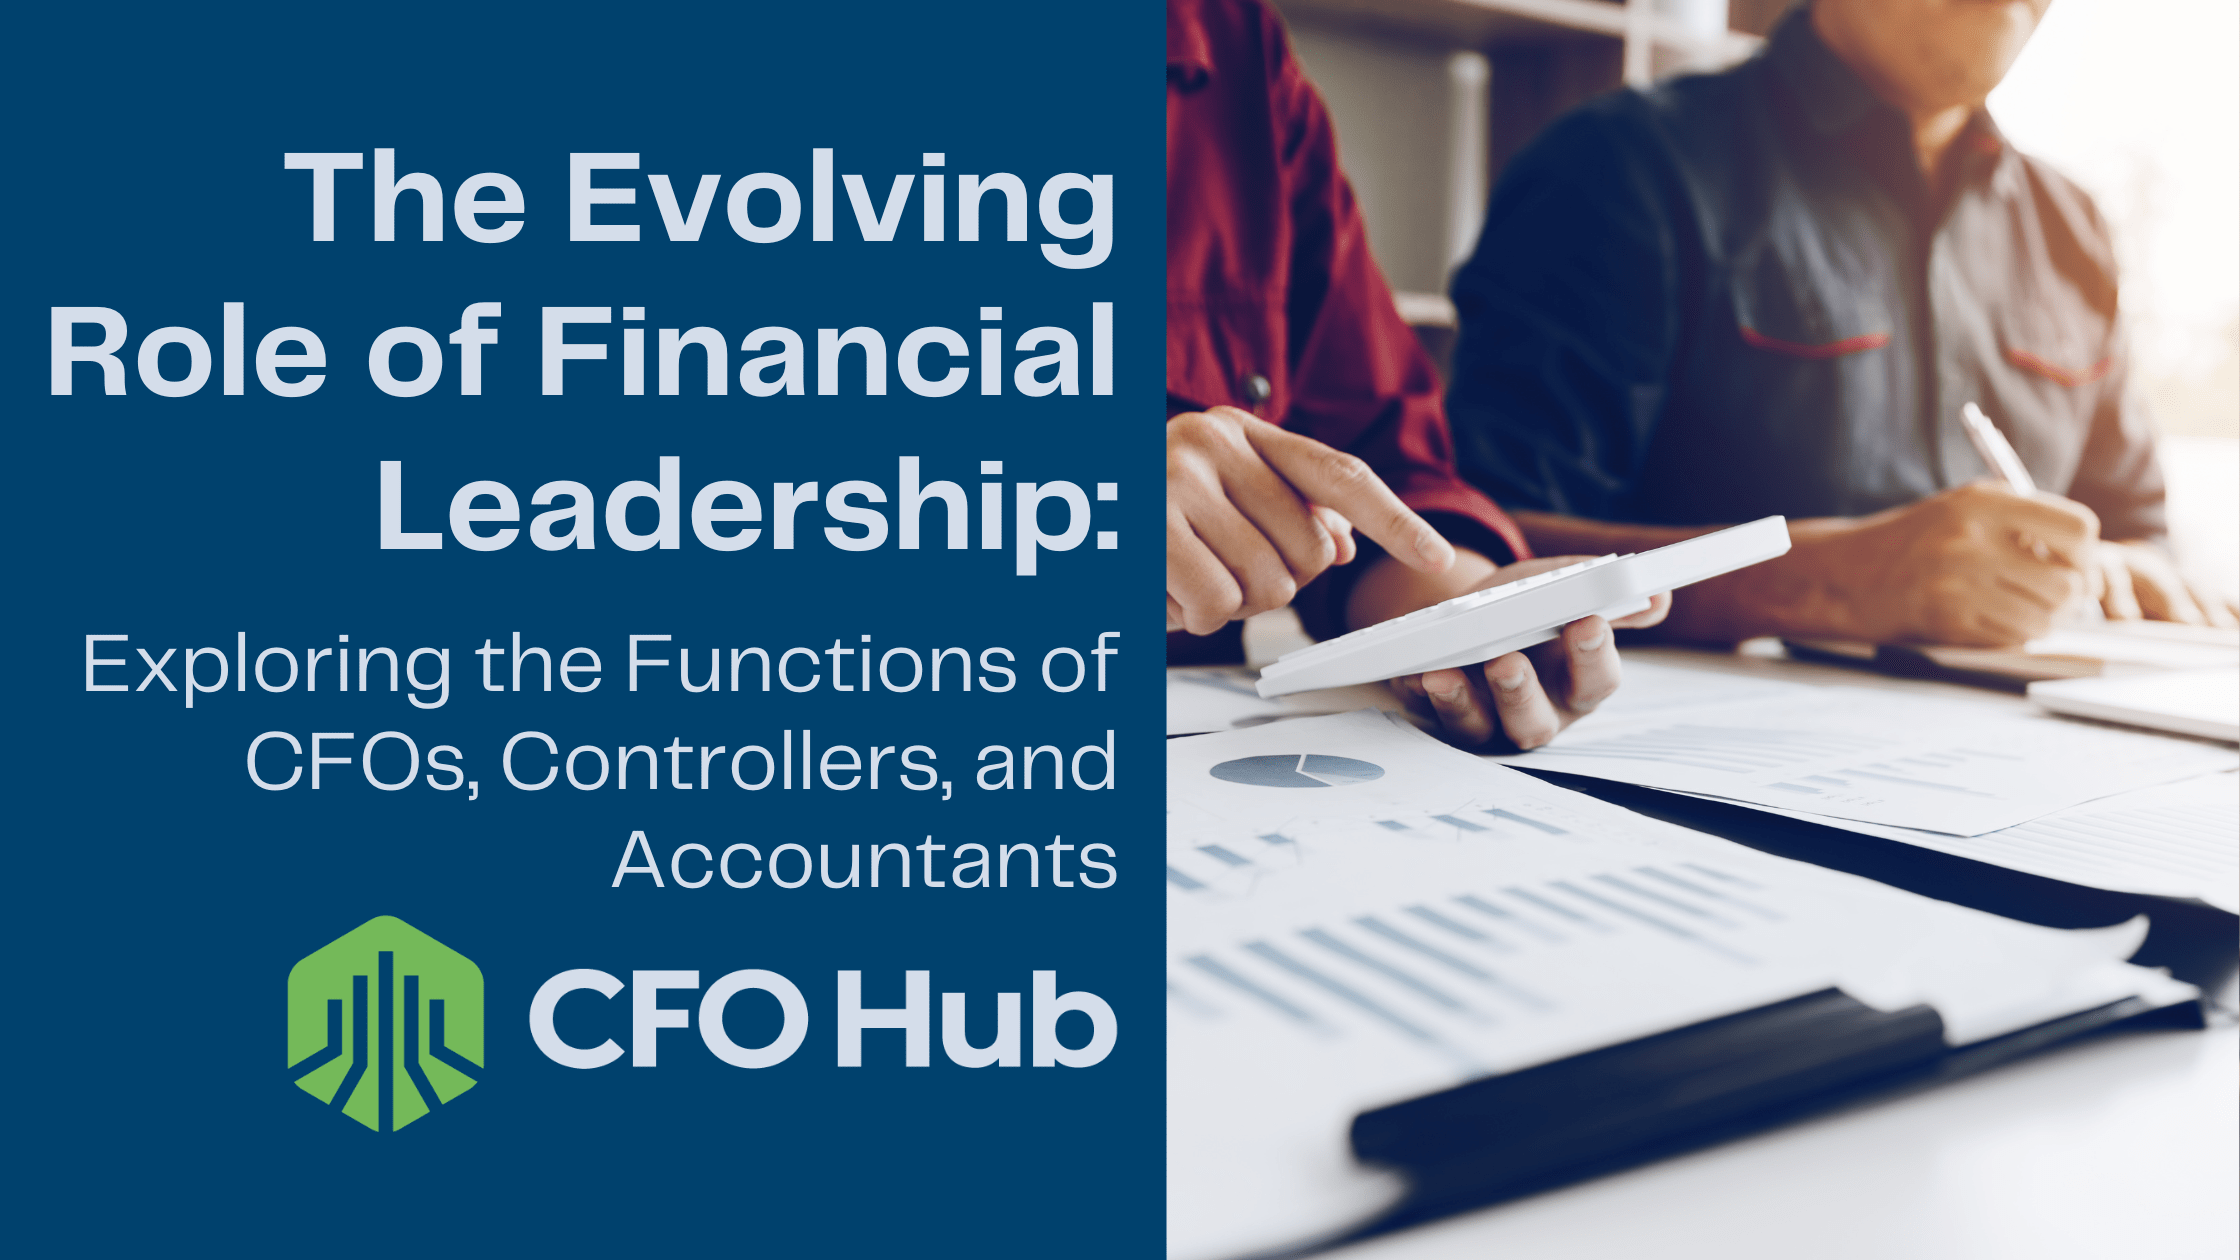 Image with the title "The Evolving Role of Financial Leadership: Exploring the Functions of CFOs, Controllers, and Accountants" from CFO Hub. It shows two individuals reviewing documents and using a calculator, highlighting the critical roles of CFOs and Controllers in financial leadership.